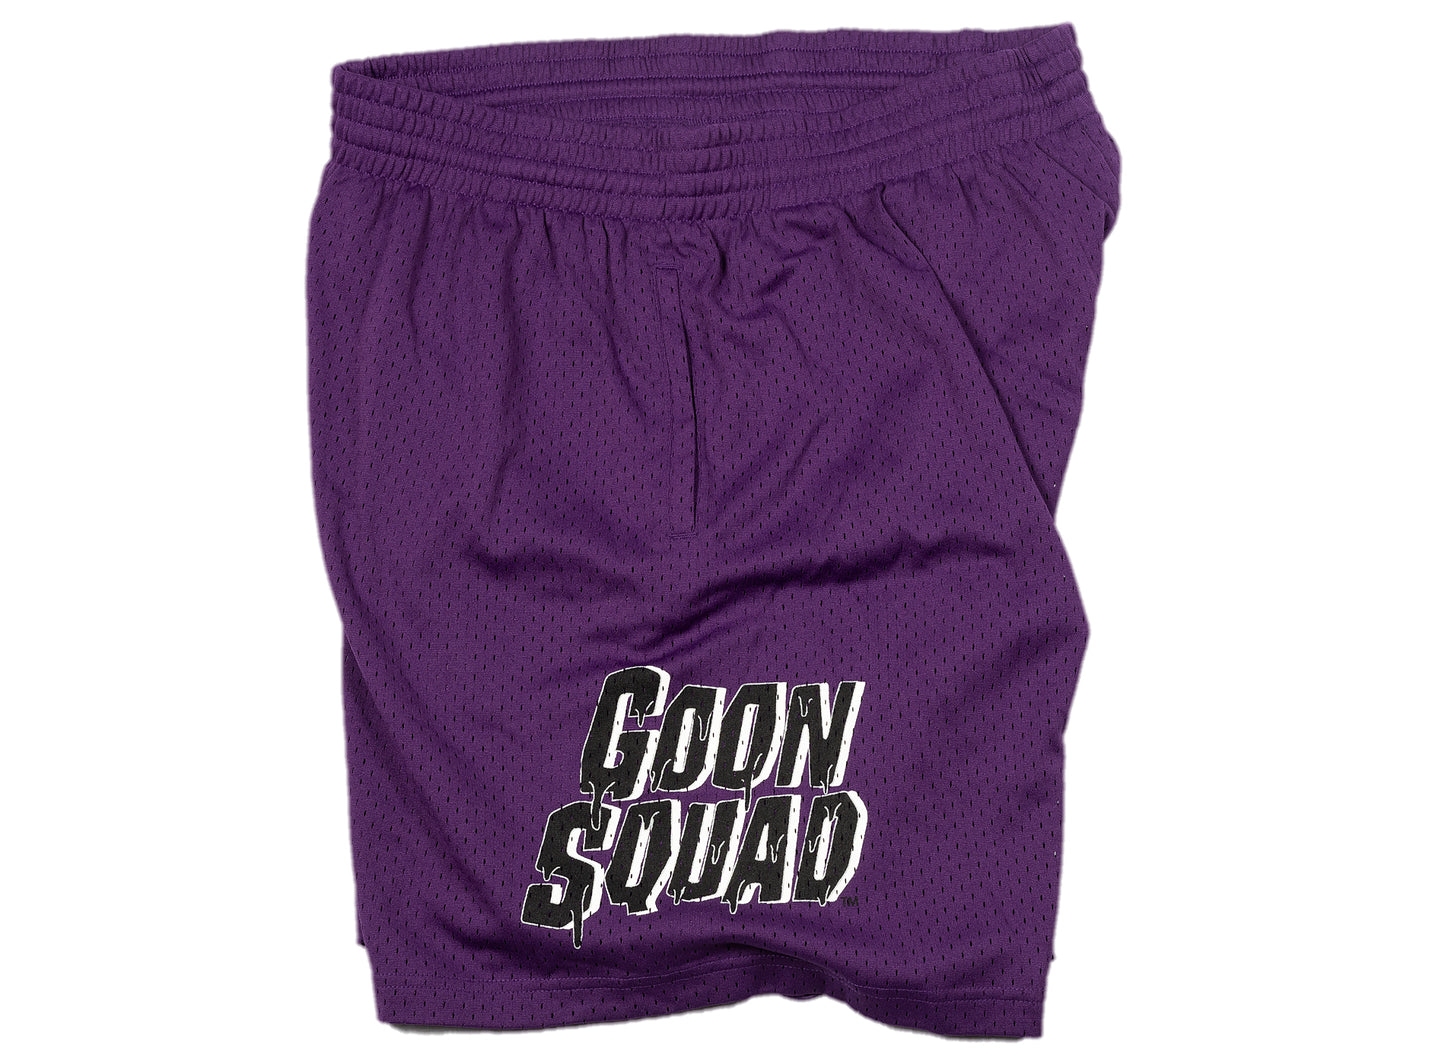 Mitchell Ness EPC Goon Squad Warner Brothers Property Shorts